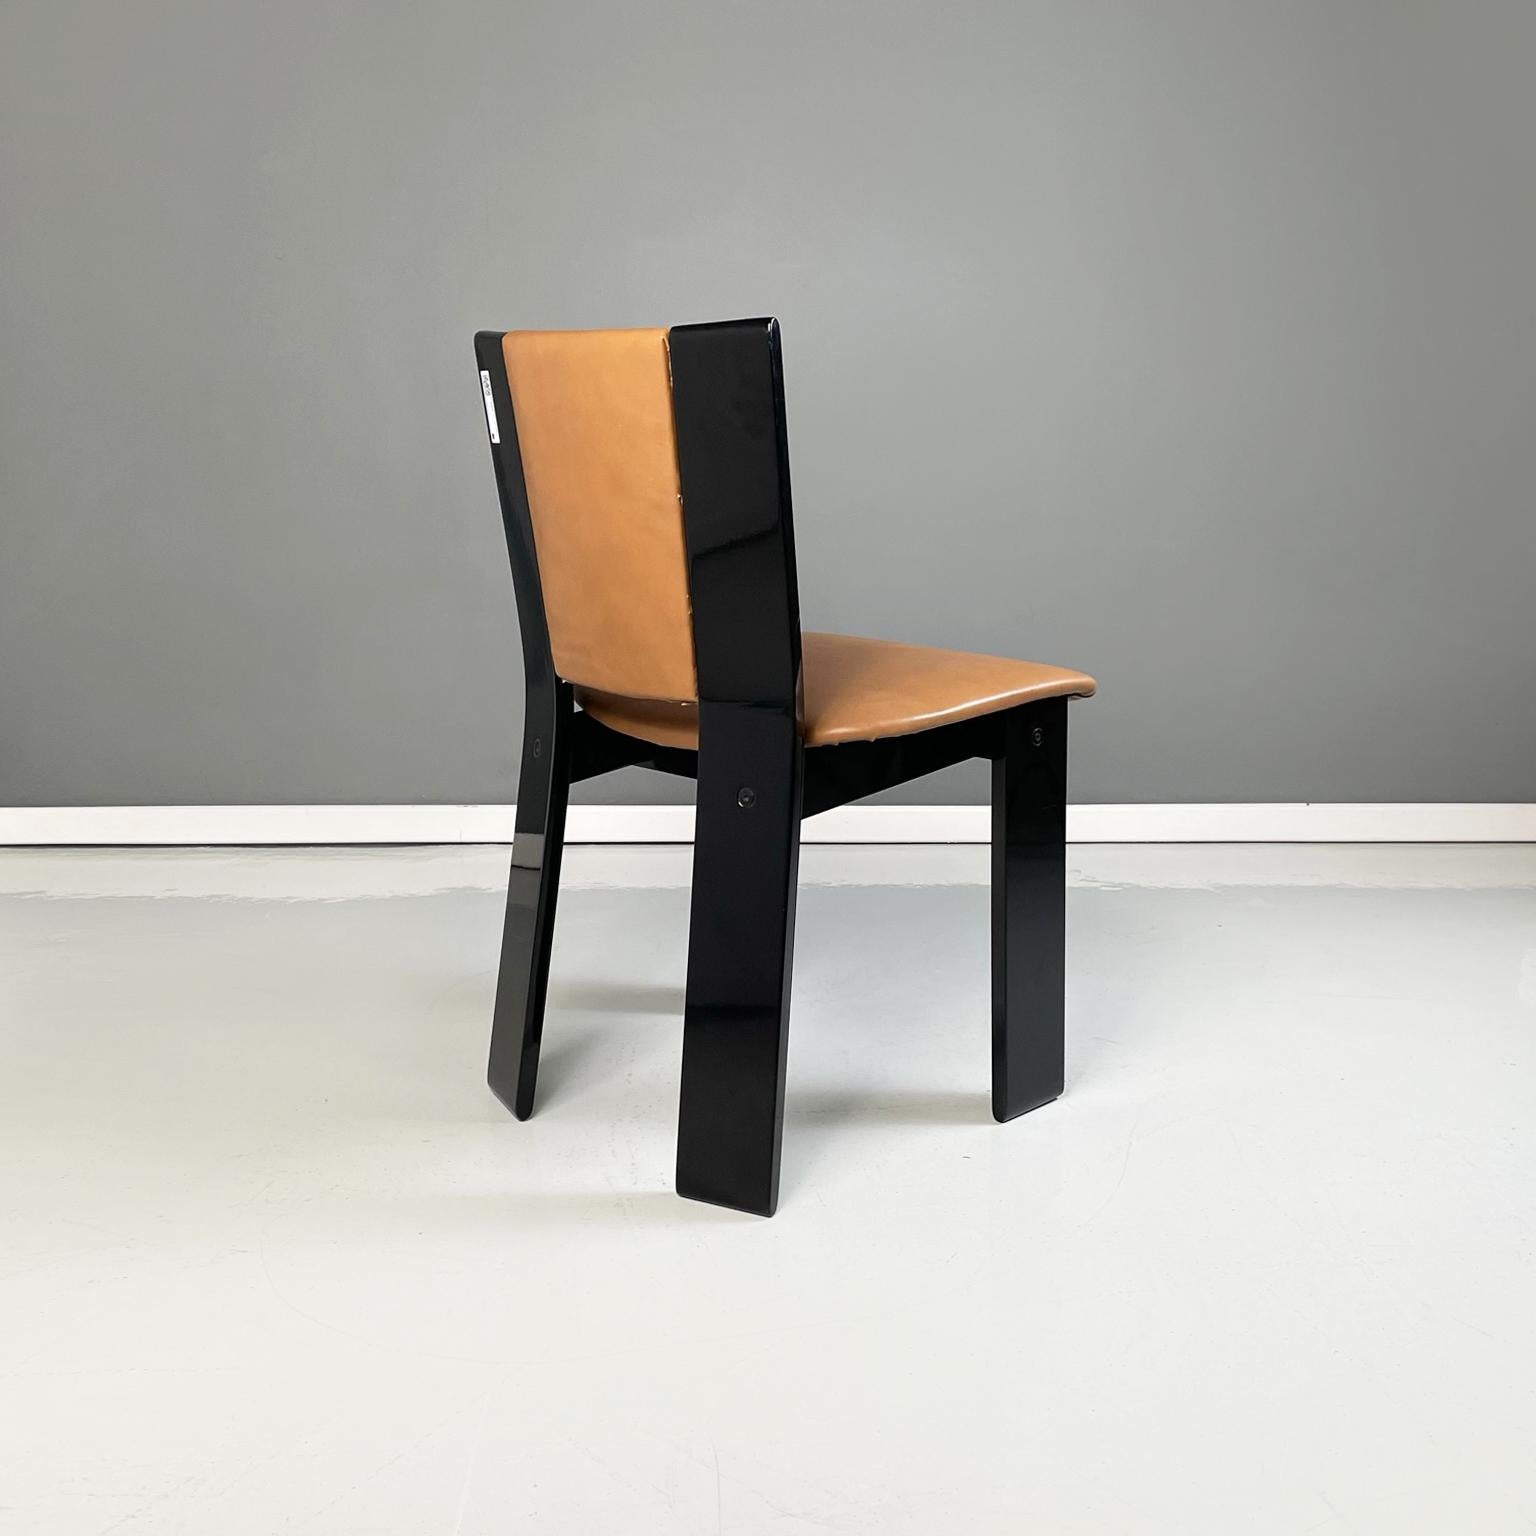 Italian Modern Black Lacquered Brown Leather Chairs Acerbis International, 1980s For Sale 1